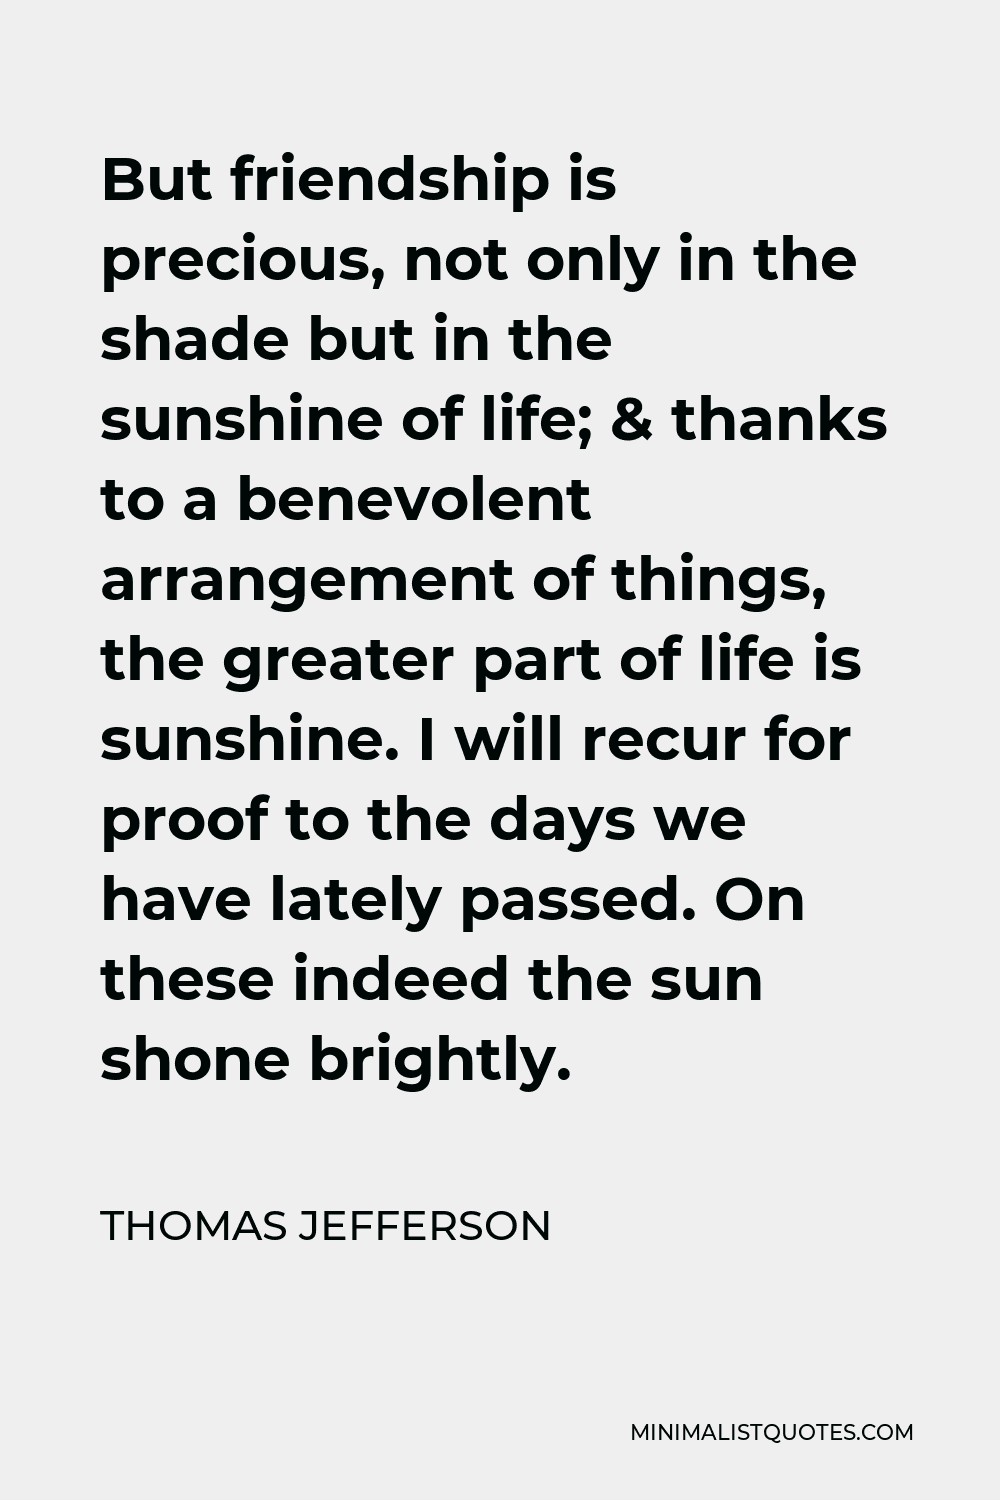 Thomas Jefferson Quote - But friendship is precious, not only in the shade but in the sunshine of life; & thanks to a benevolent arrangement of things, the greater part of life is sunshine. I will recur for proof to the days we have lately passed. On these indeed the sun shone brightly.